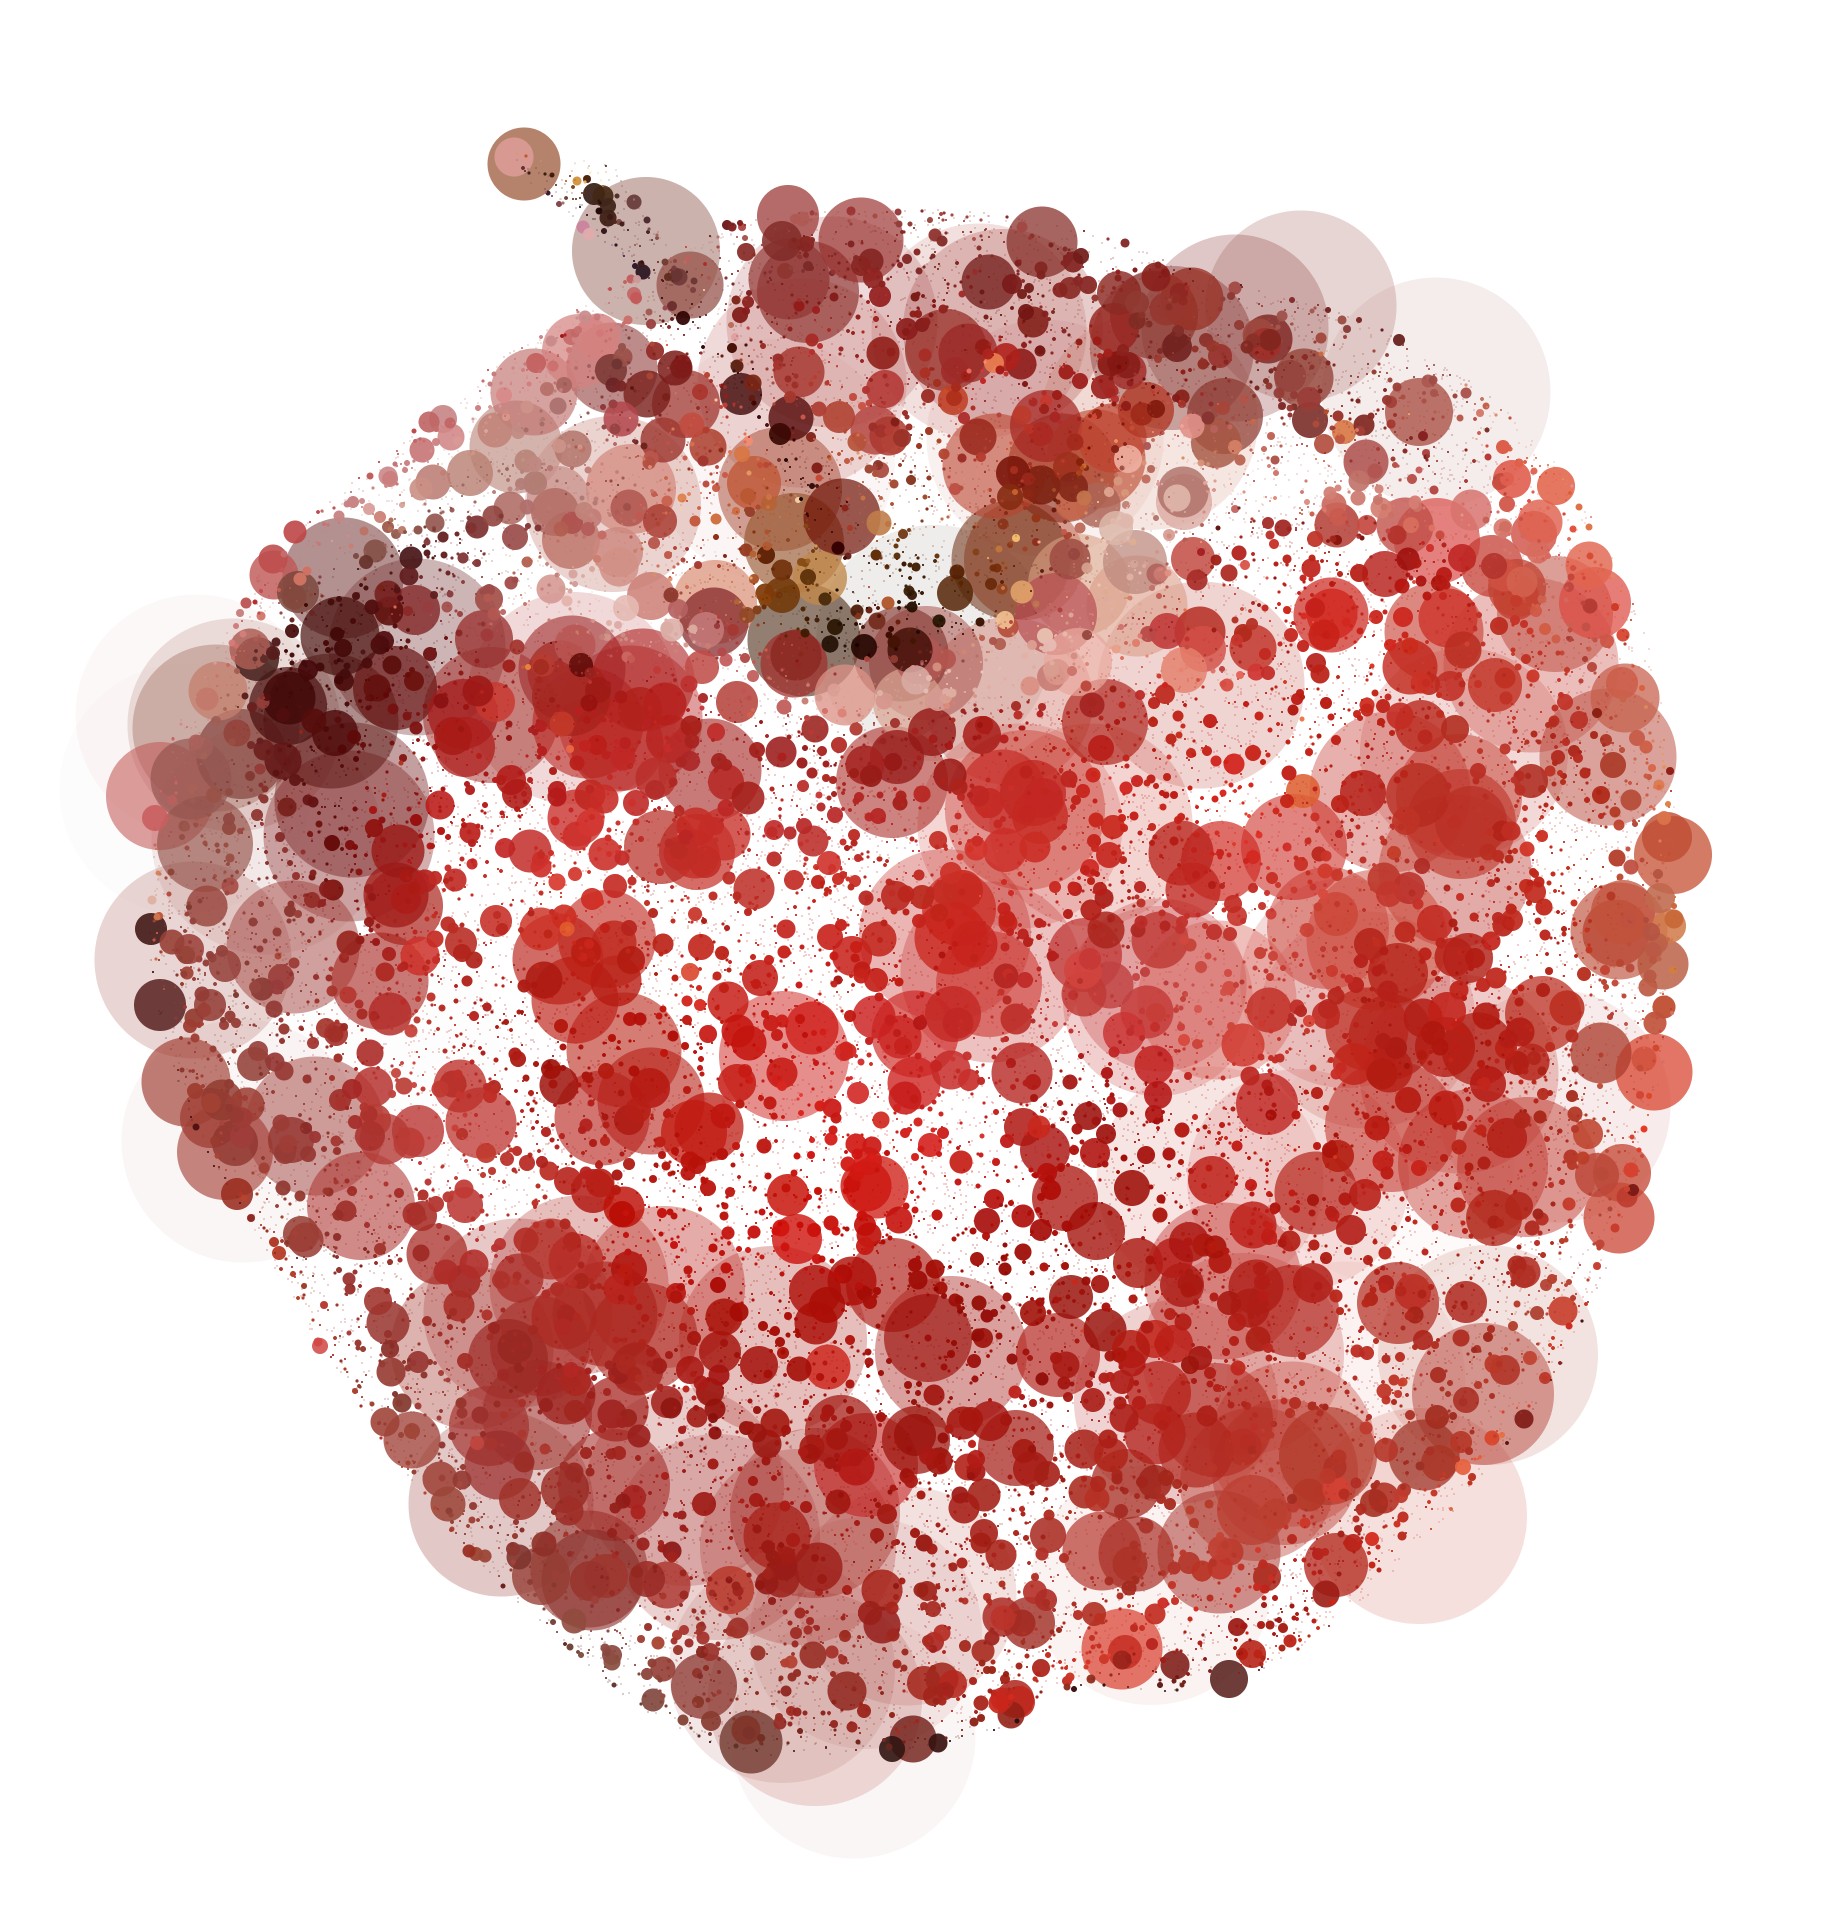 Red Dots of different sizes overlap on a white background to form an abstract apple